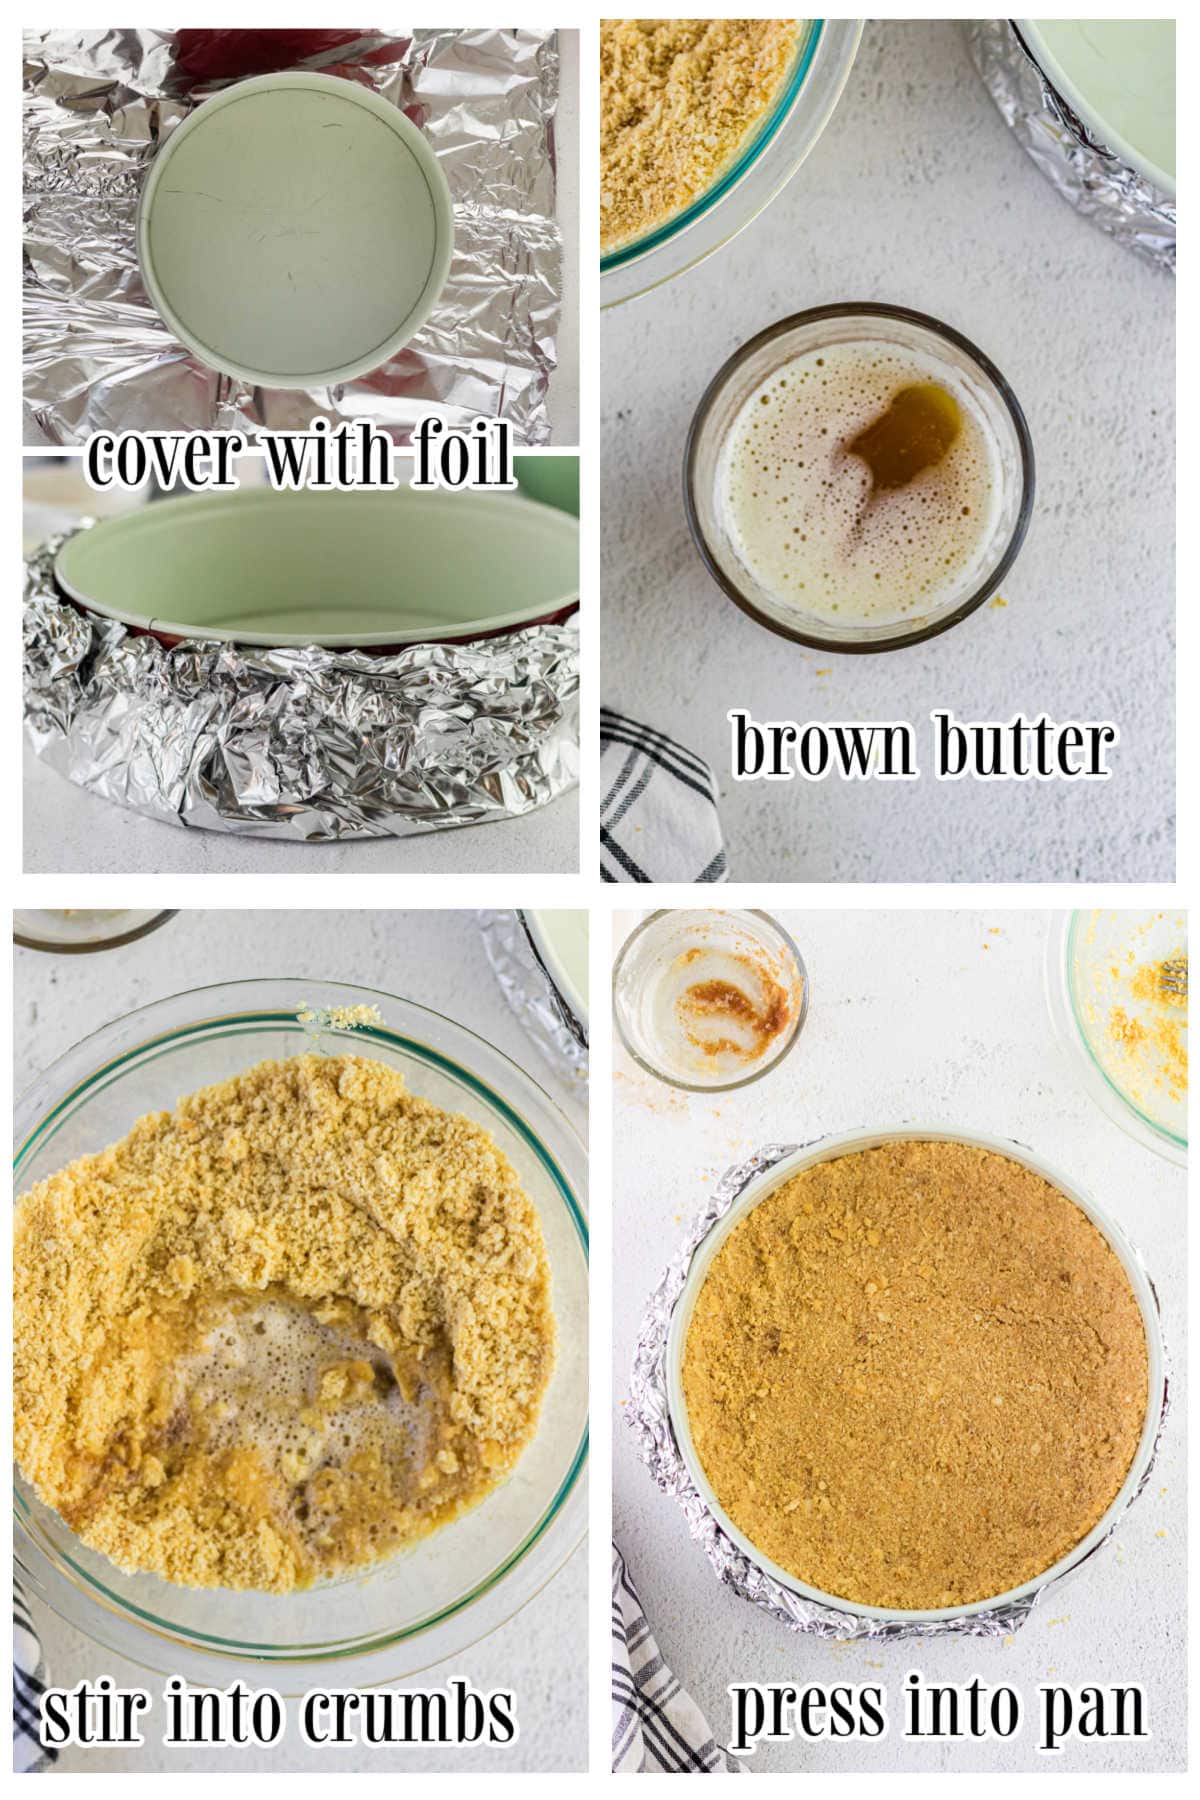 Steps for making the crust.